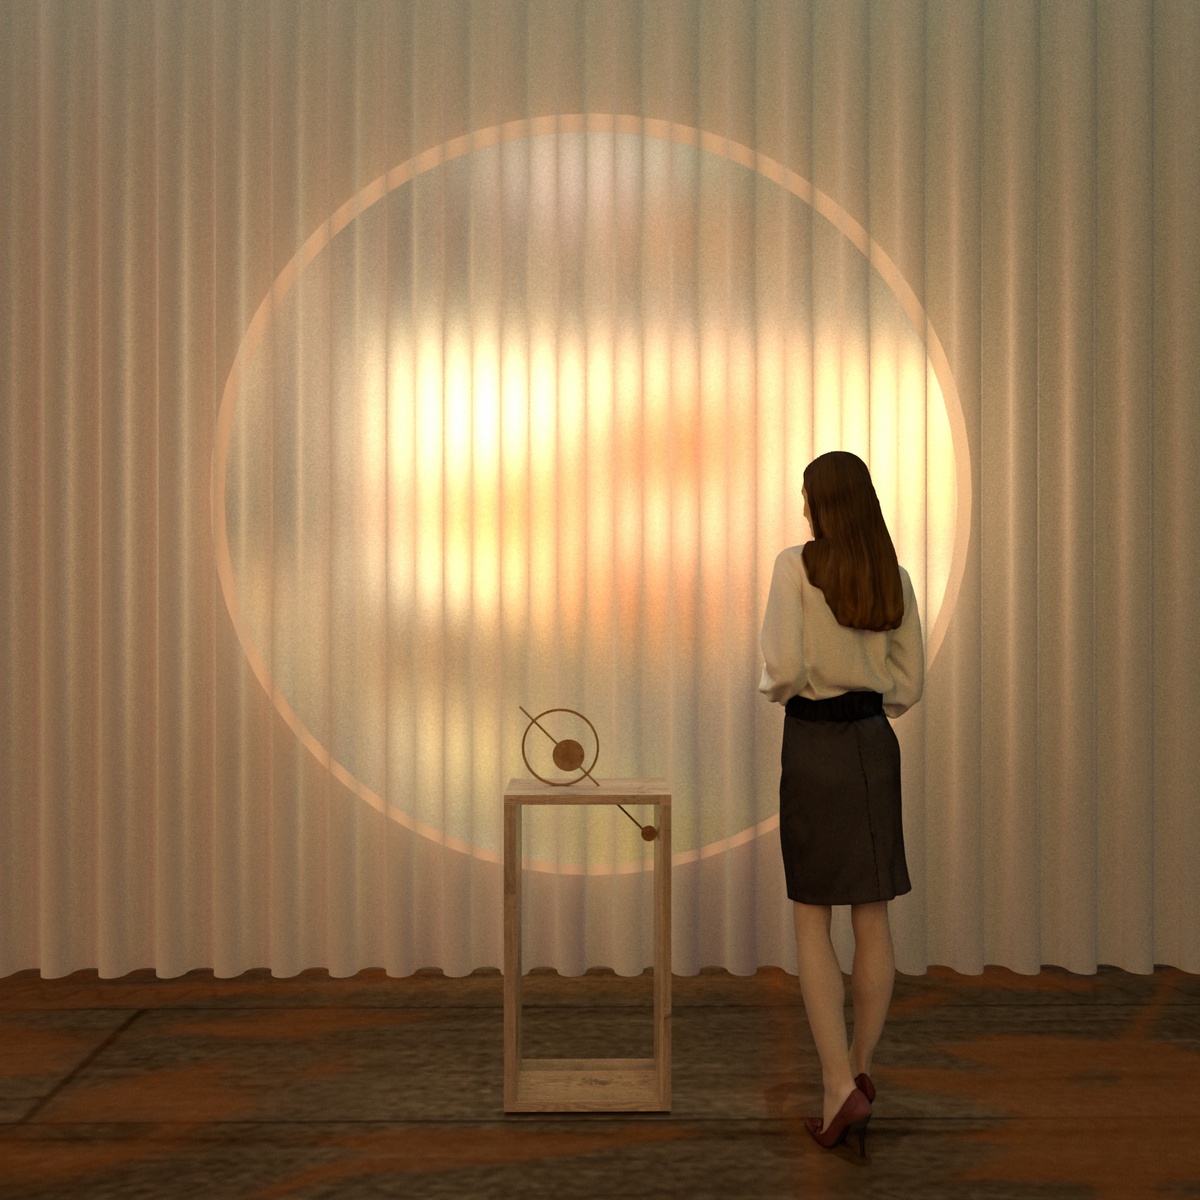 Render of woman standing in front of circular "window" with blurred animation behind